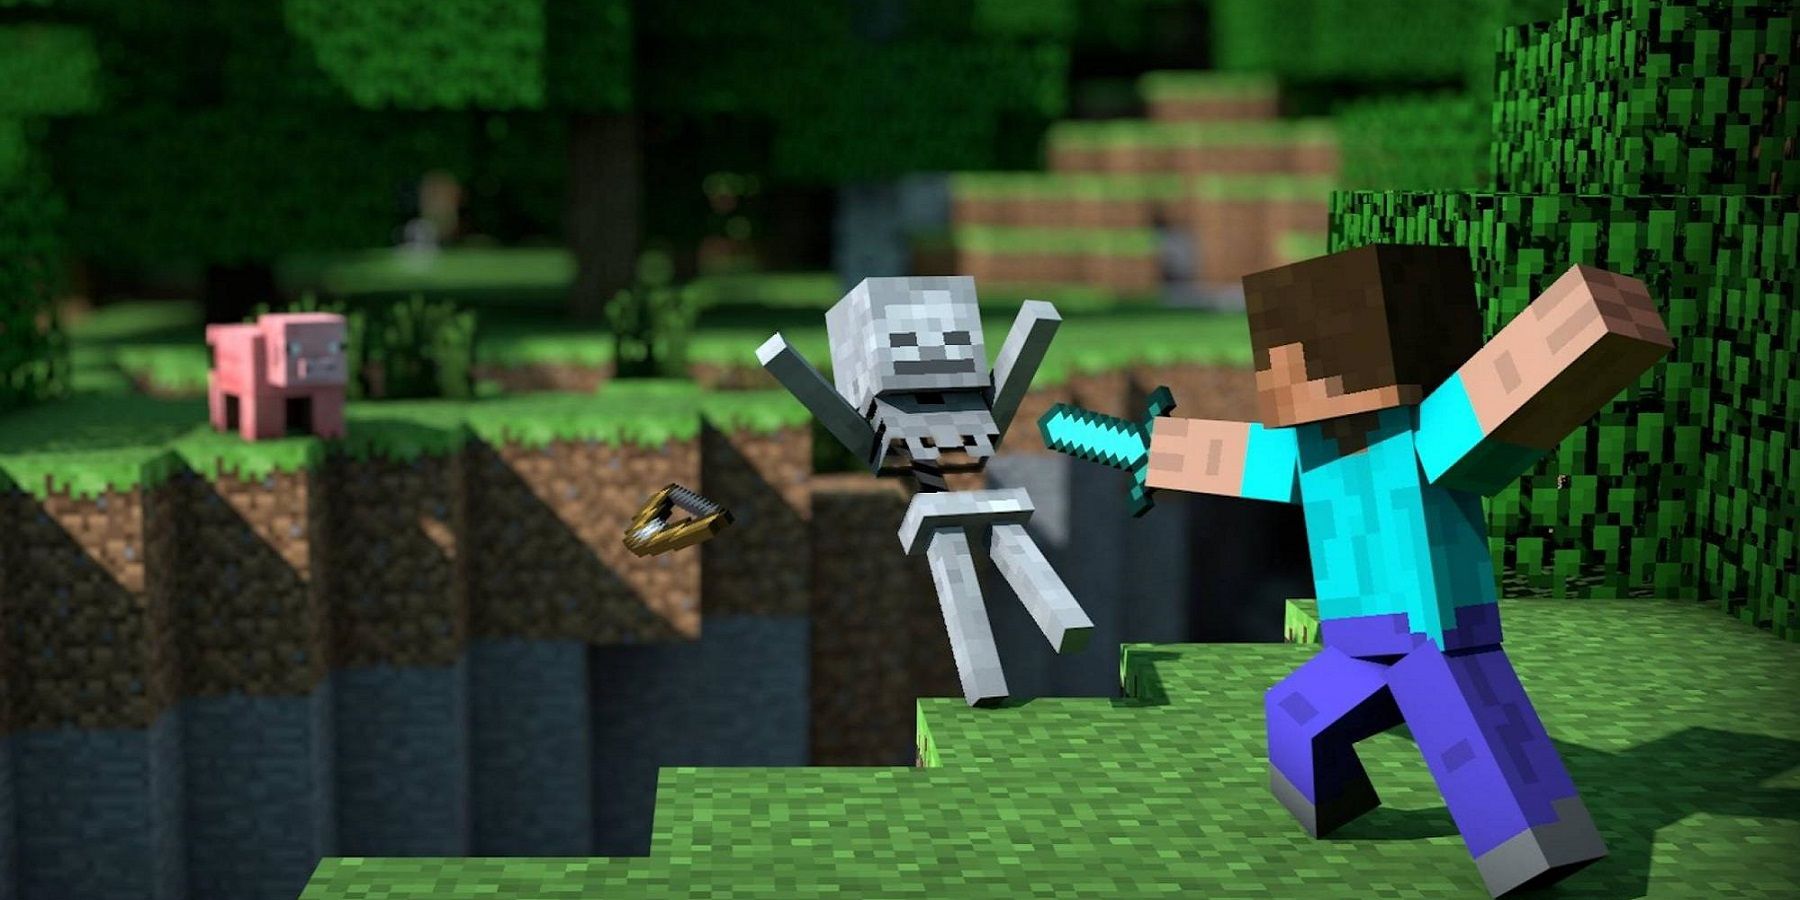 Image from Minecraft showing Steve sword fighting with a skeleton.